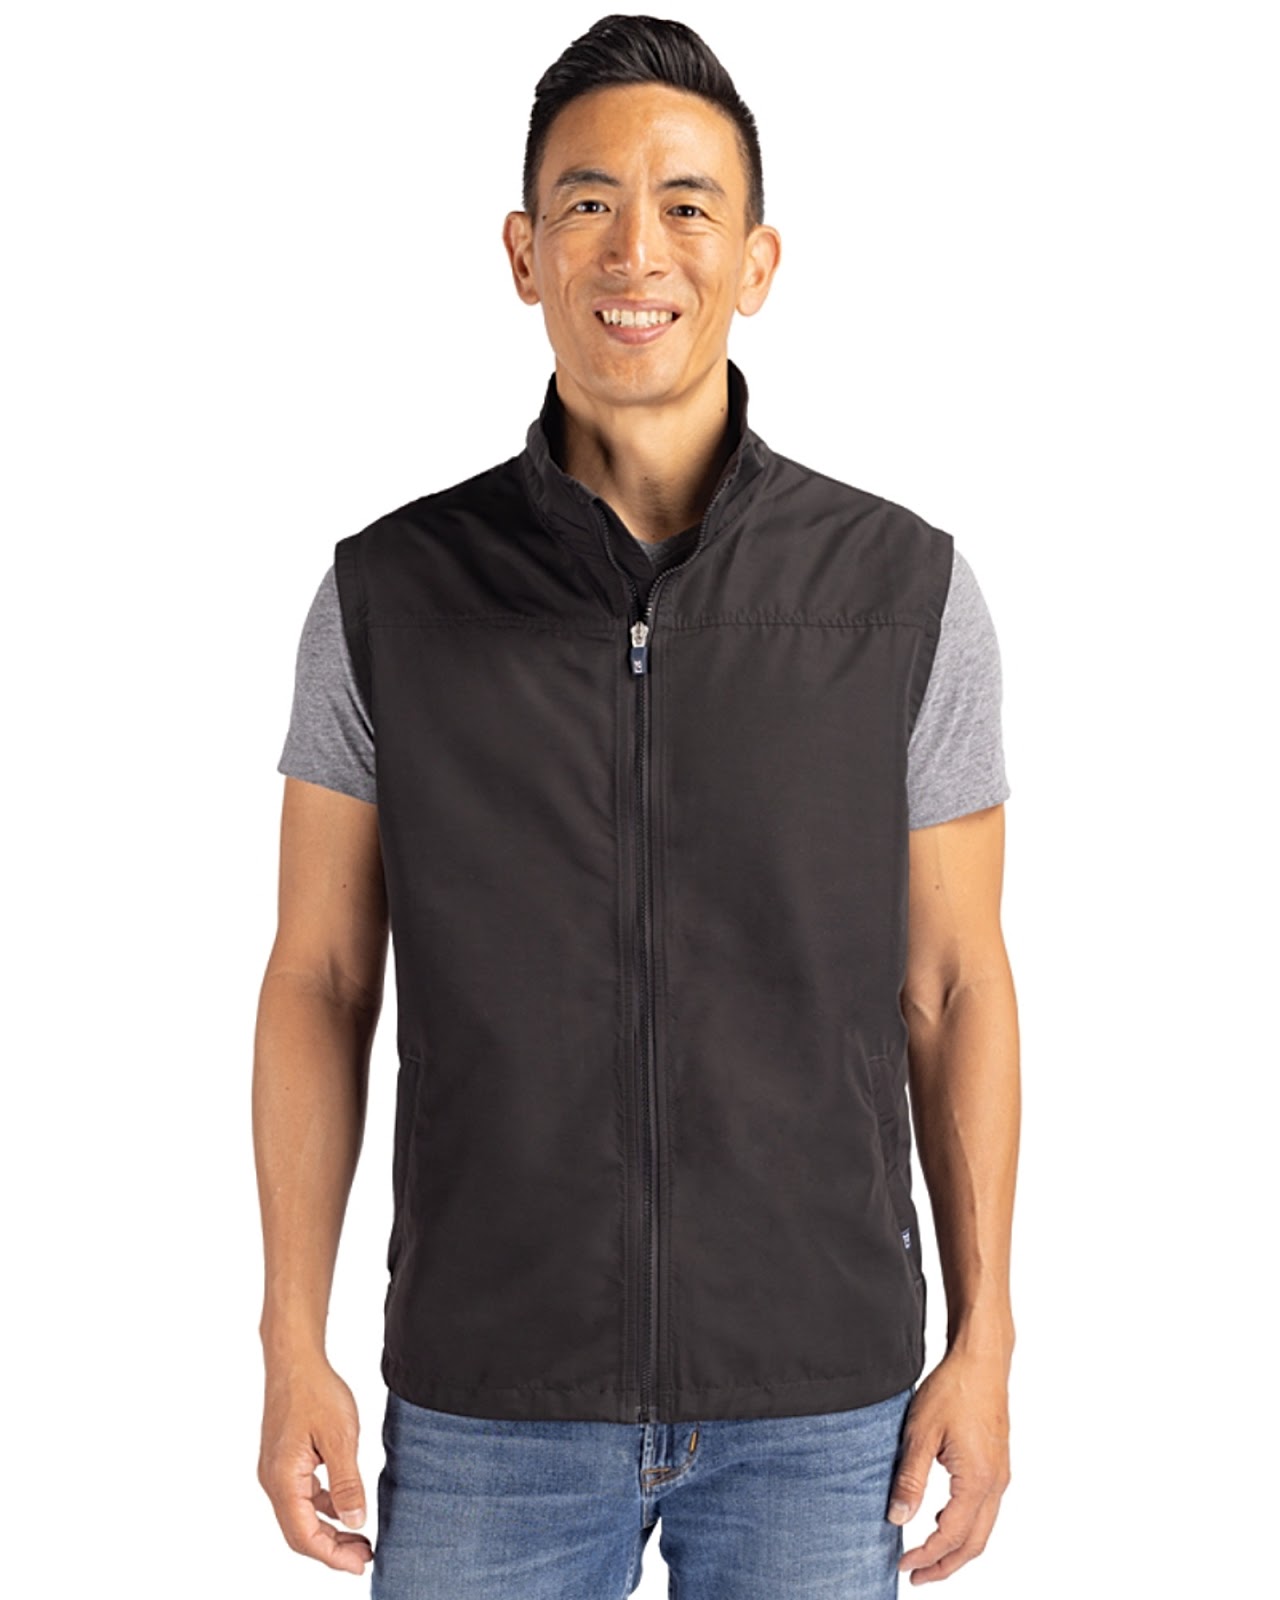 Best men's recycled vests for 2023